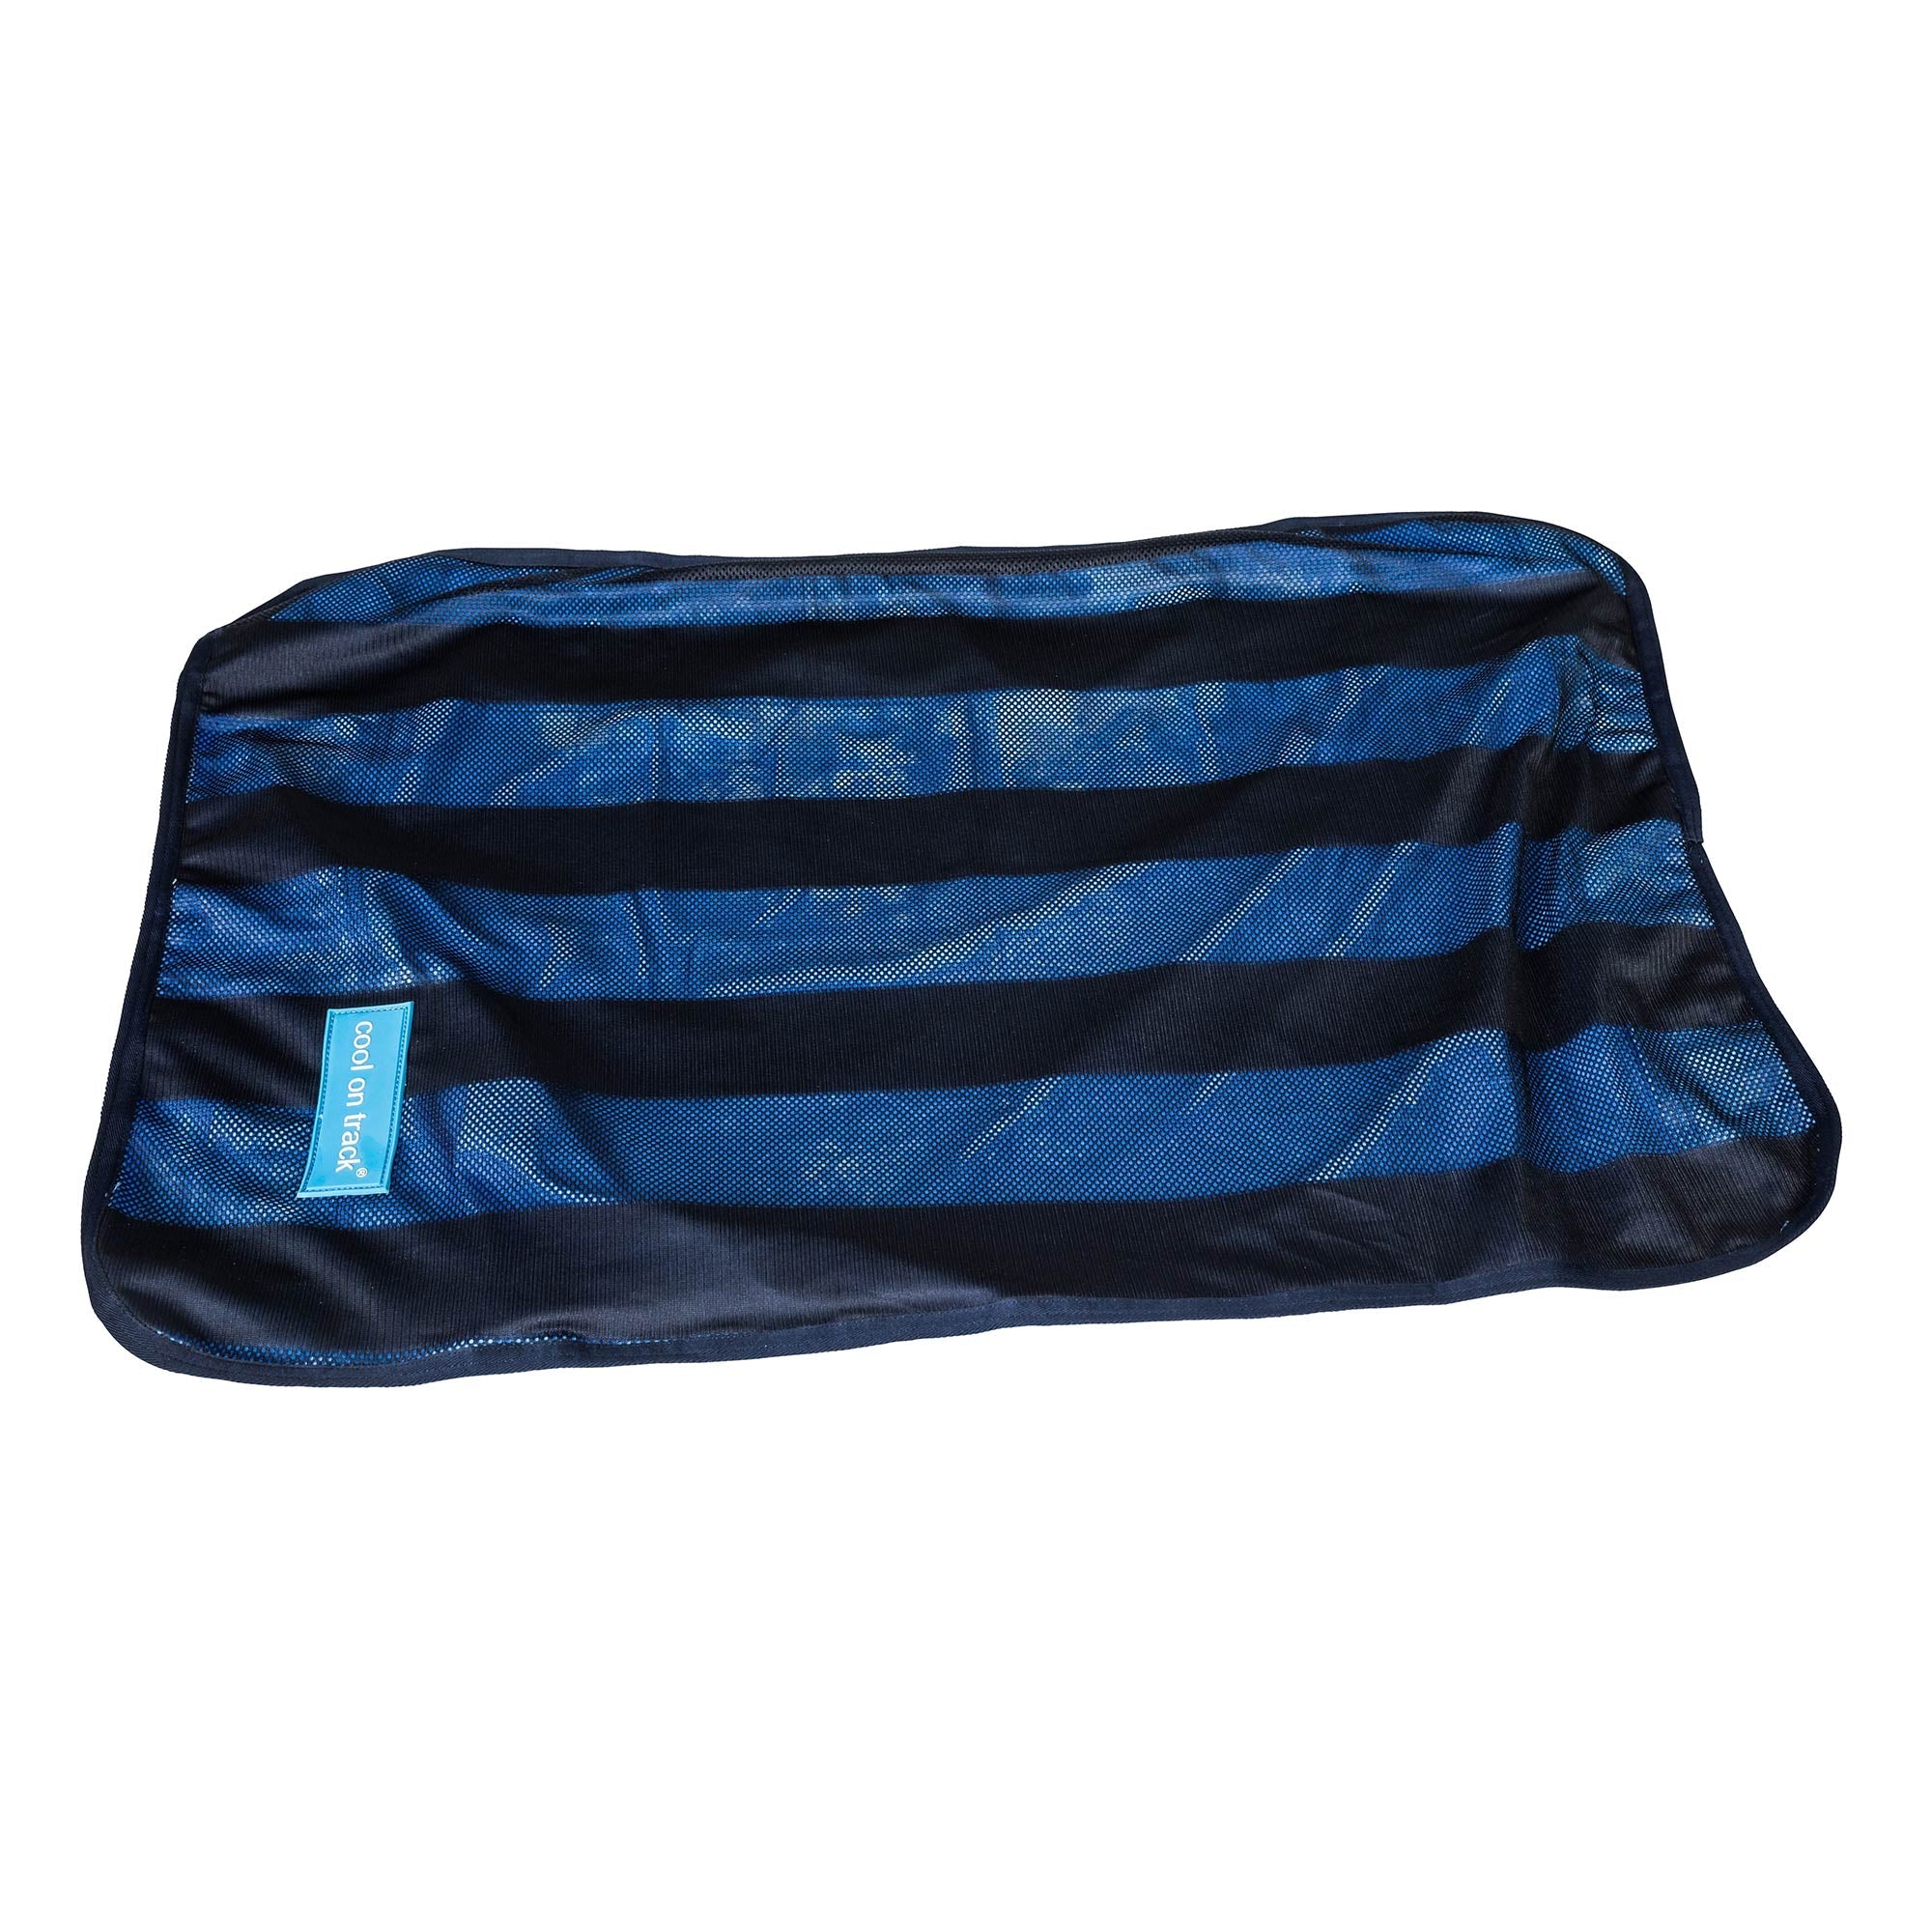 Cool on Track - Cooling Towel